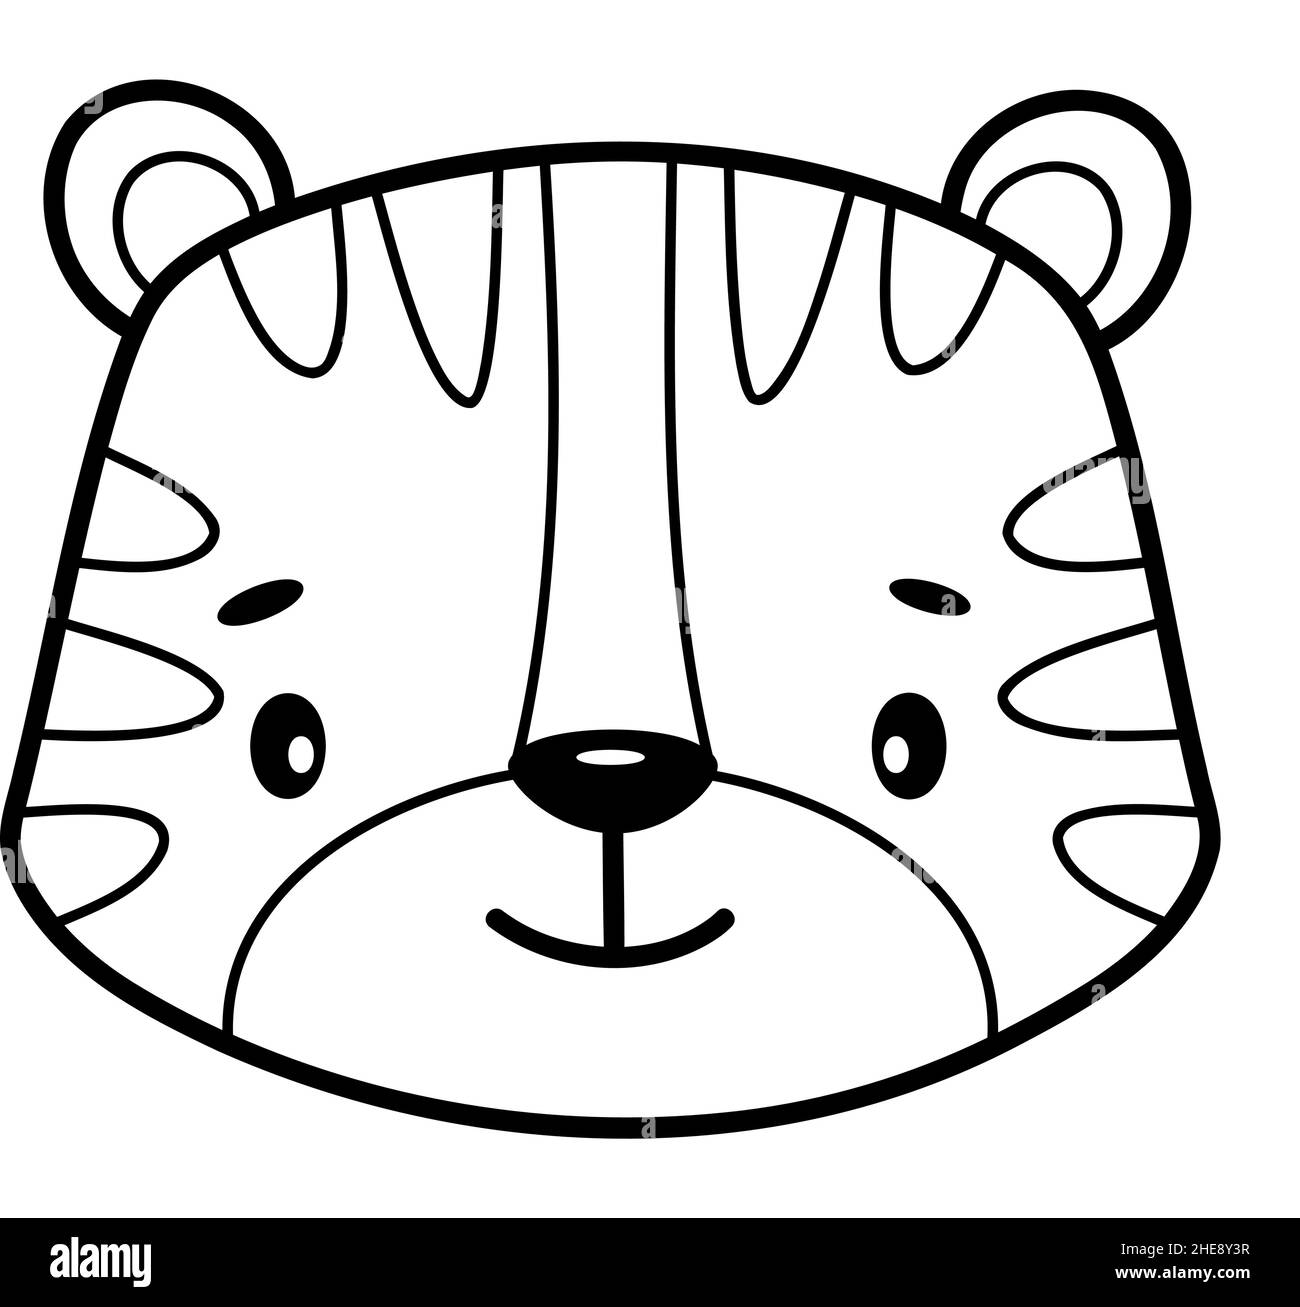 Coloring book or page for kids. Tiger black and white outline illustration  Stock Vector Image & Art - Alamy